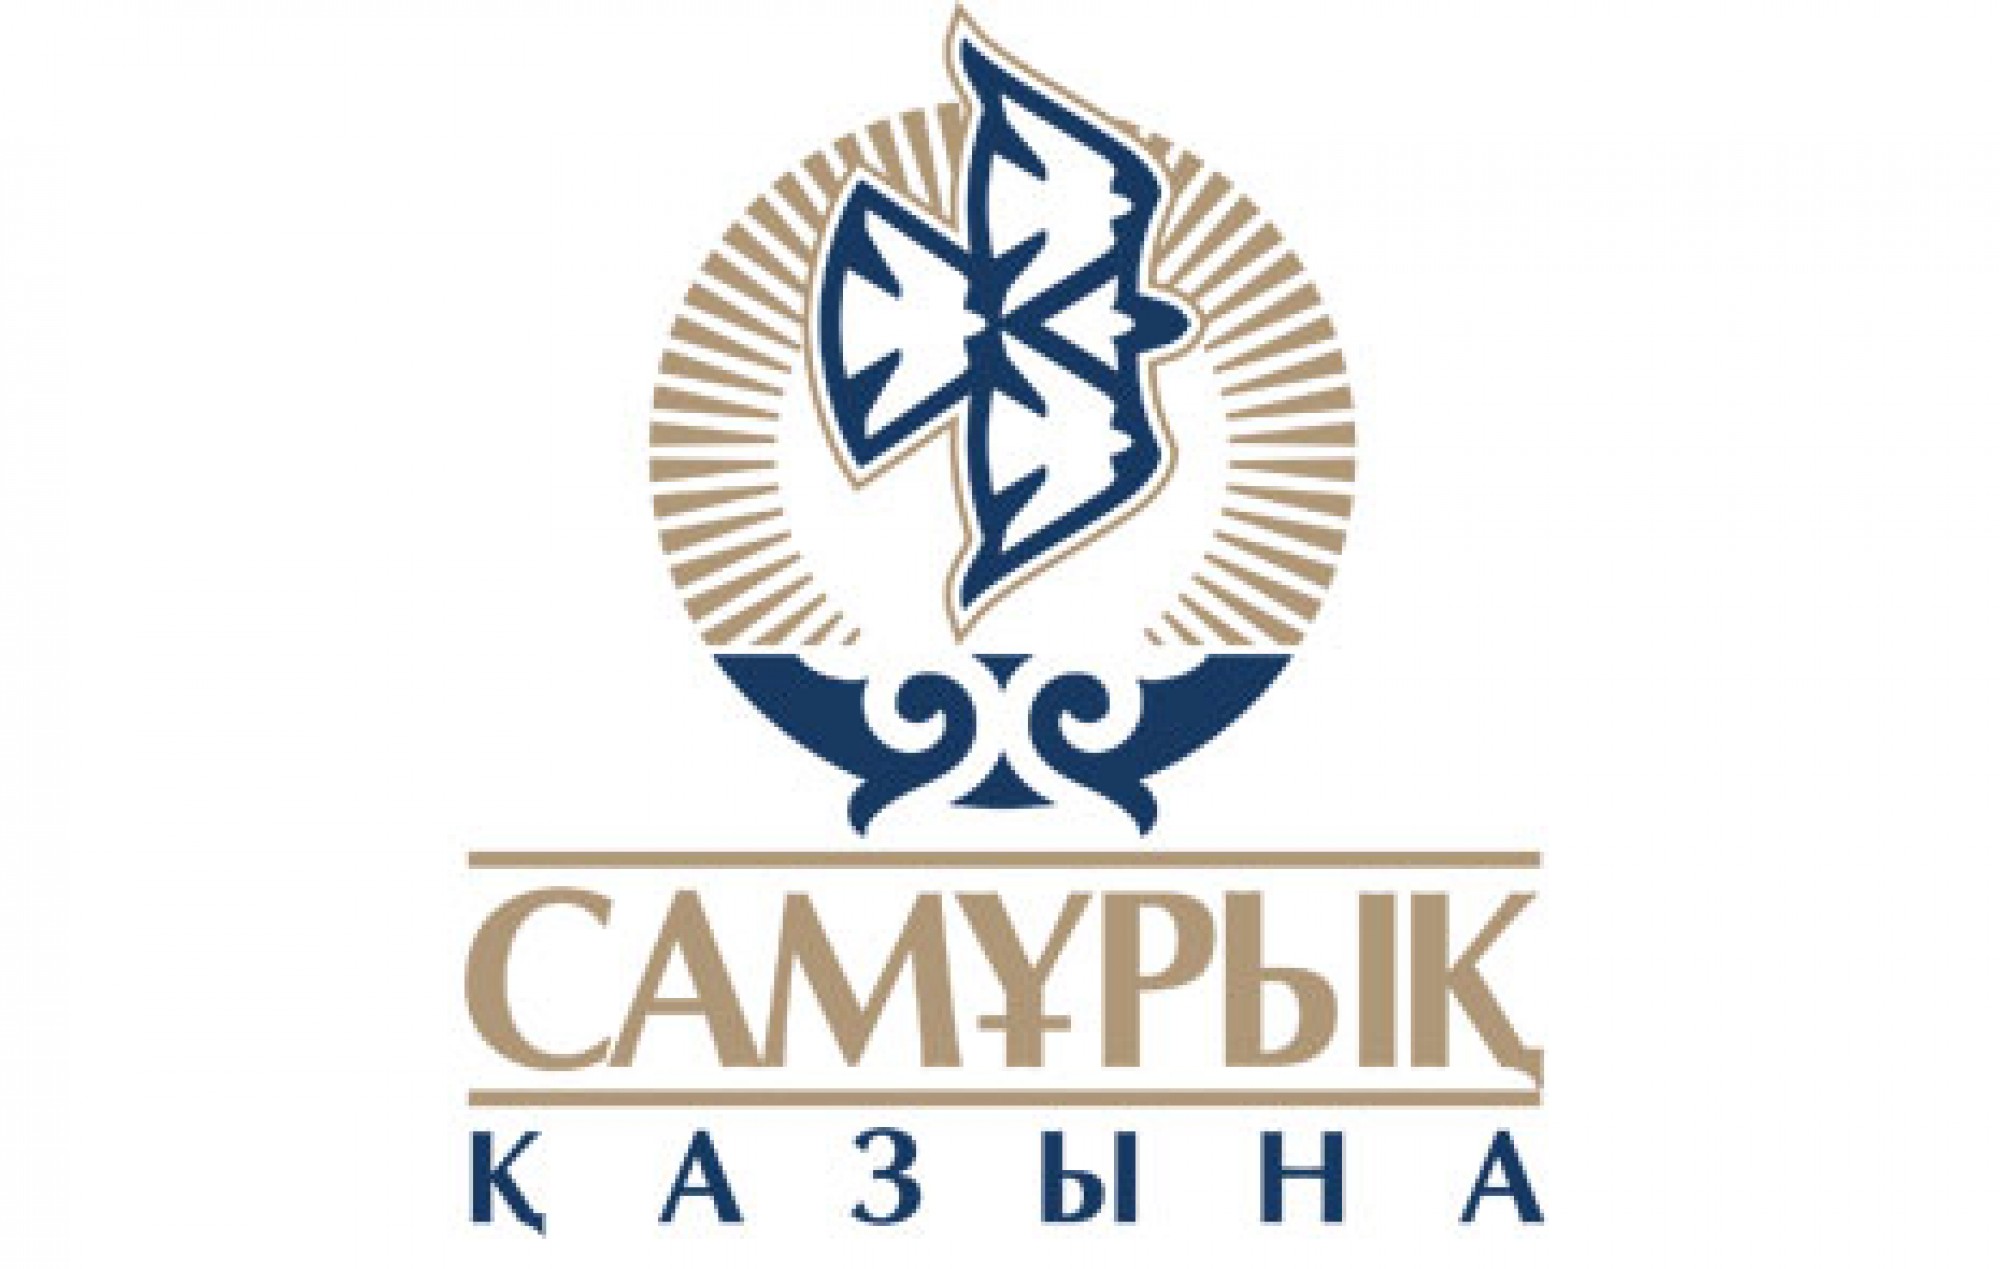 In first half year 2018, number of subsidiaries of Samruk-Kazyna Fund reduced from 359 to 312